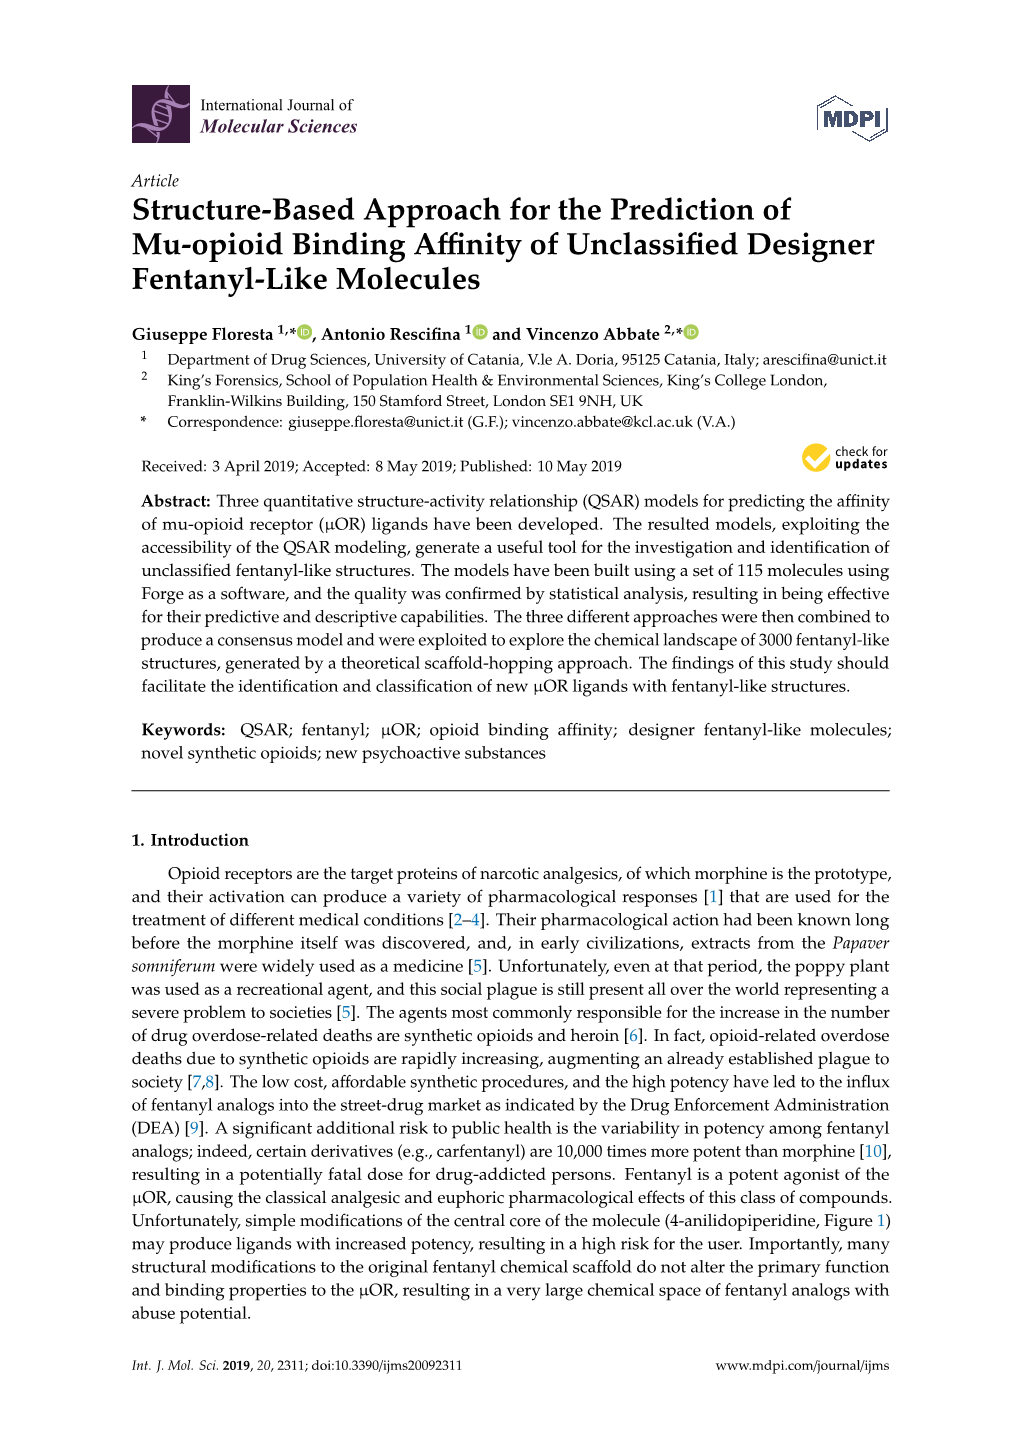 Structure-Based Approach for the Prediction of Mu-Opioid Binding Aﬃnity of Unclassiﬁed Designer Fentanyl-Like Molecules